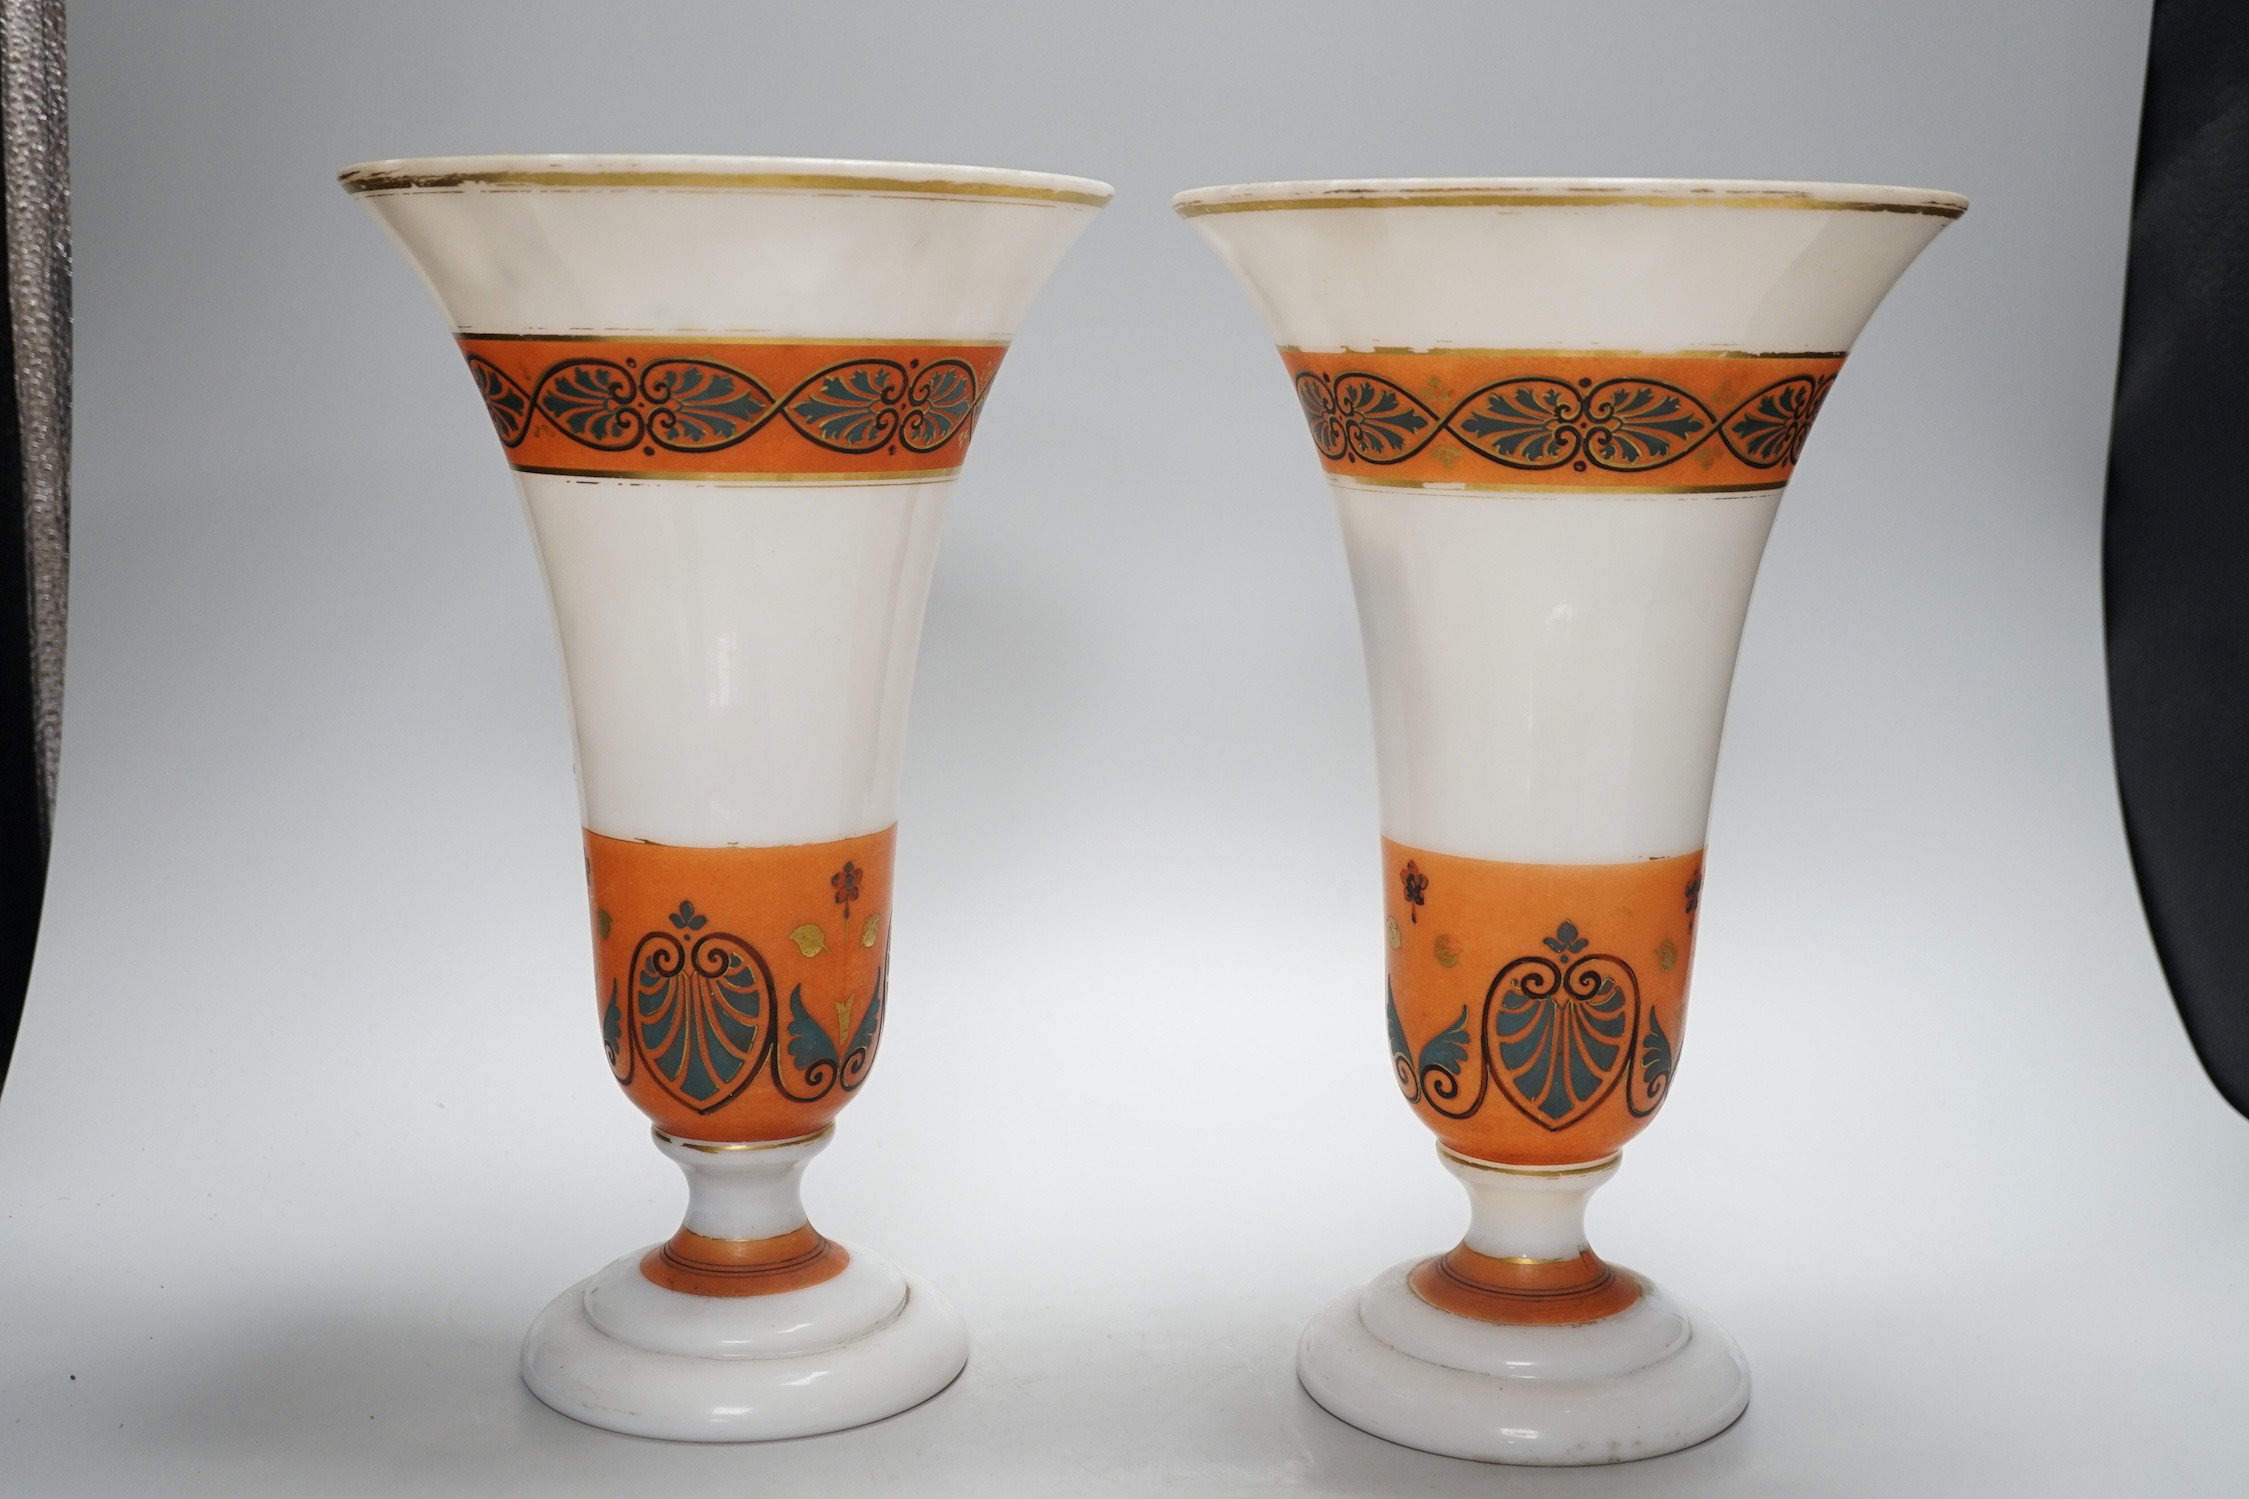 A pair of opaque glass anthemion vases, with orange decorative bands, 30cms high - Image 2 of 3